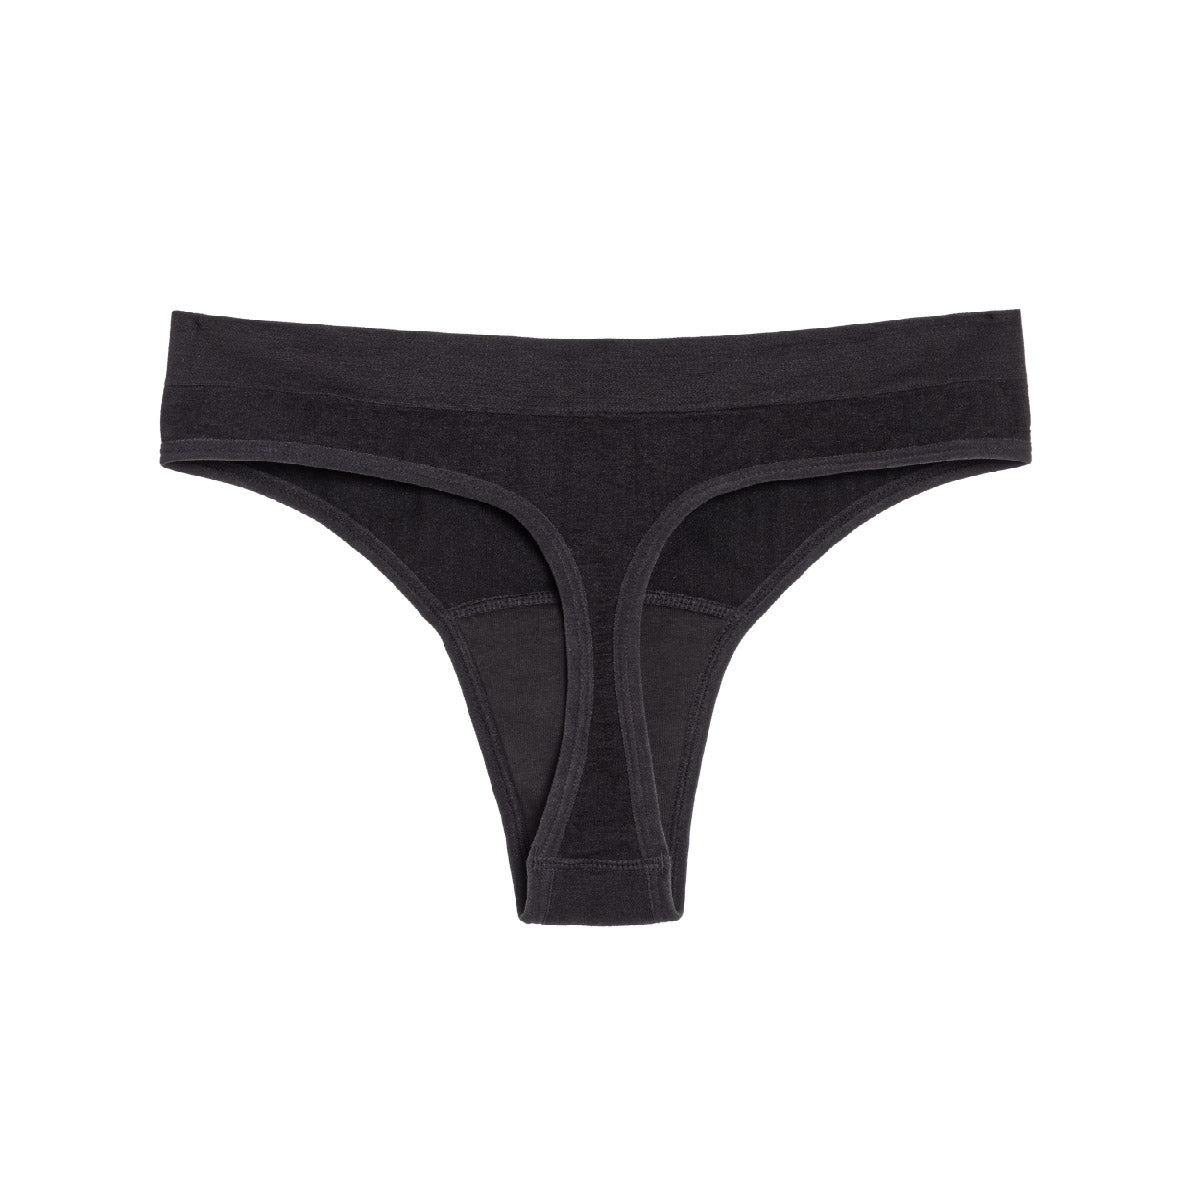 The Thong Period. in Sporty Stretch For Light Flows – The Period Company